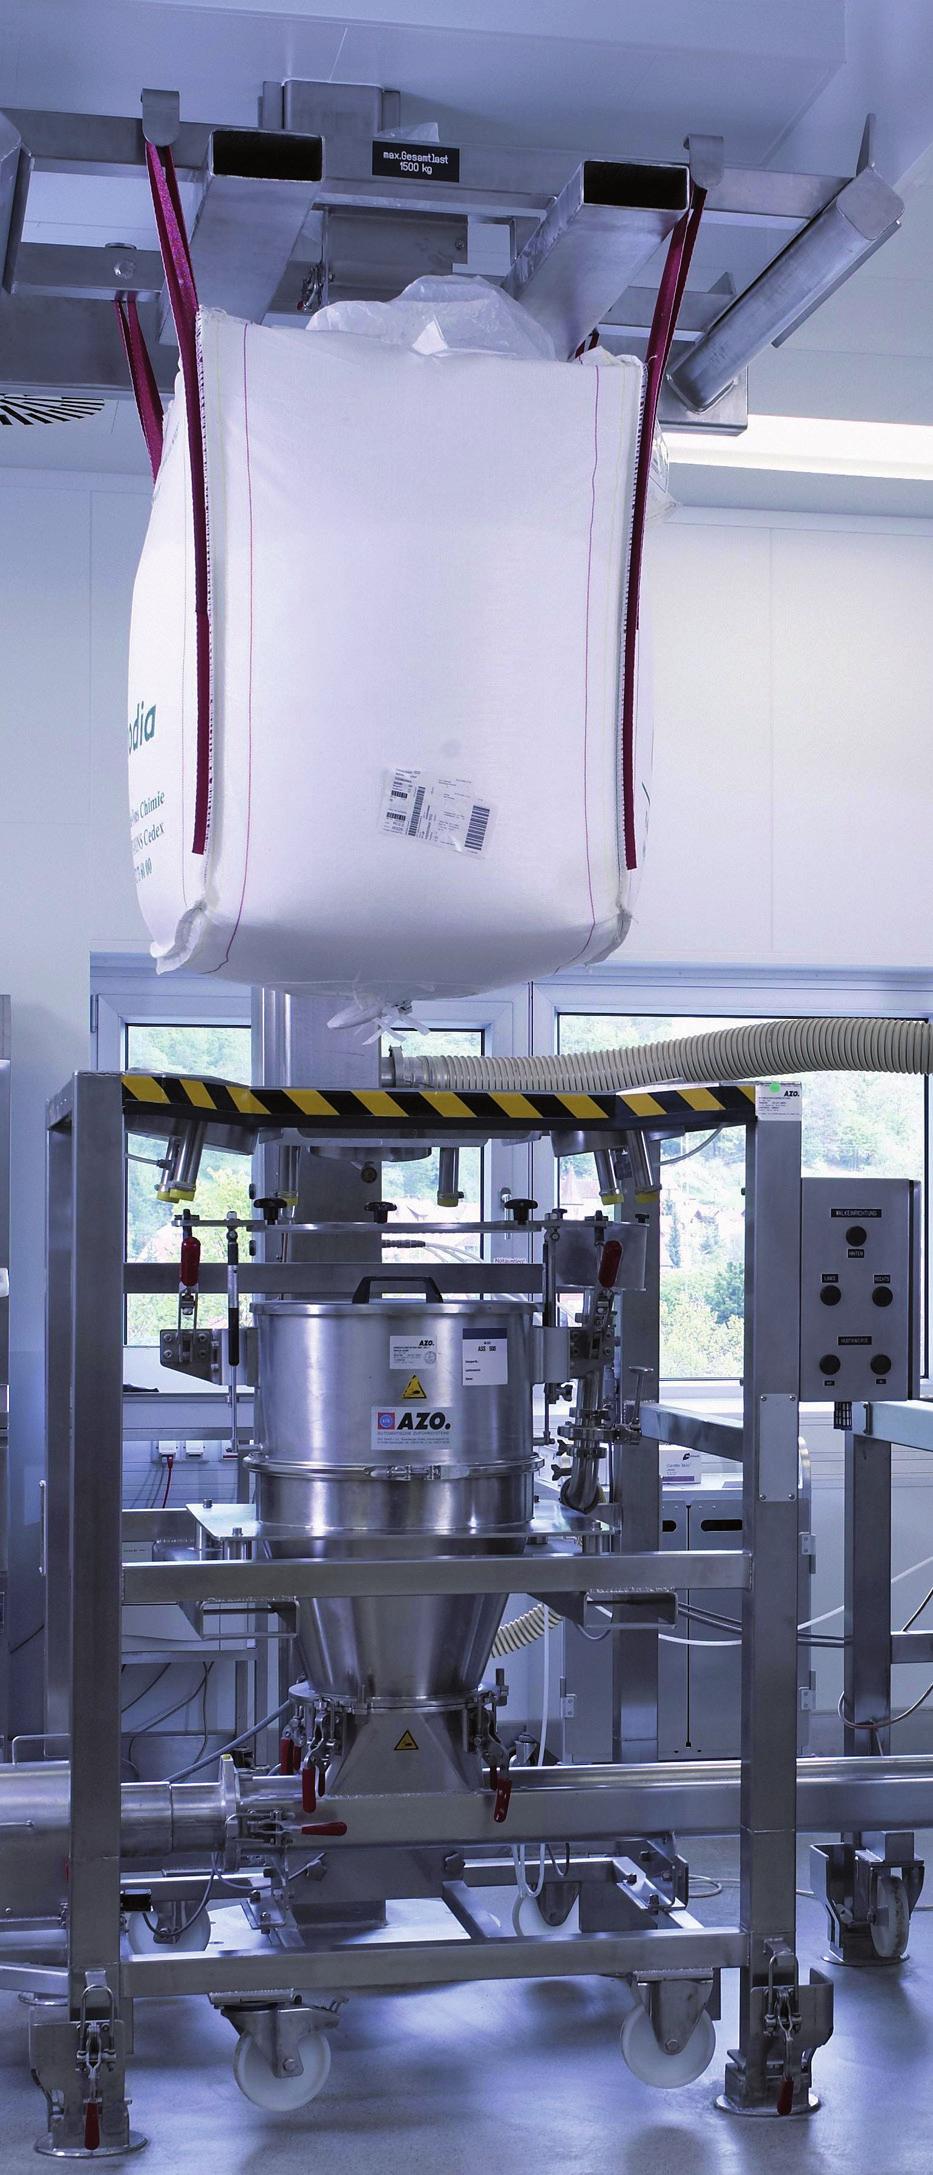 Zone 1/21, Division 1 Filling and Blending Applications The IND560x excels as a single material filling or dosing controller with features such as target memory tables and latching discrete inputs